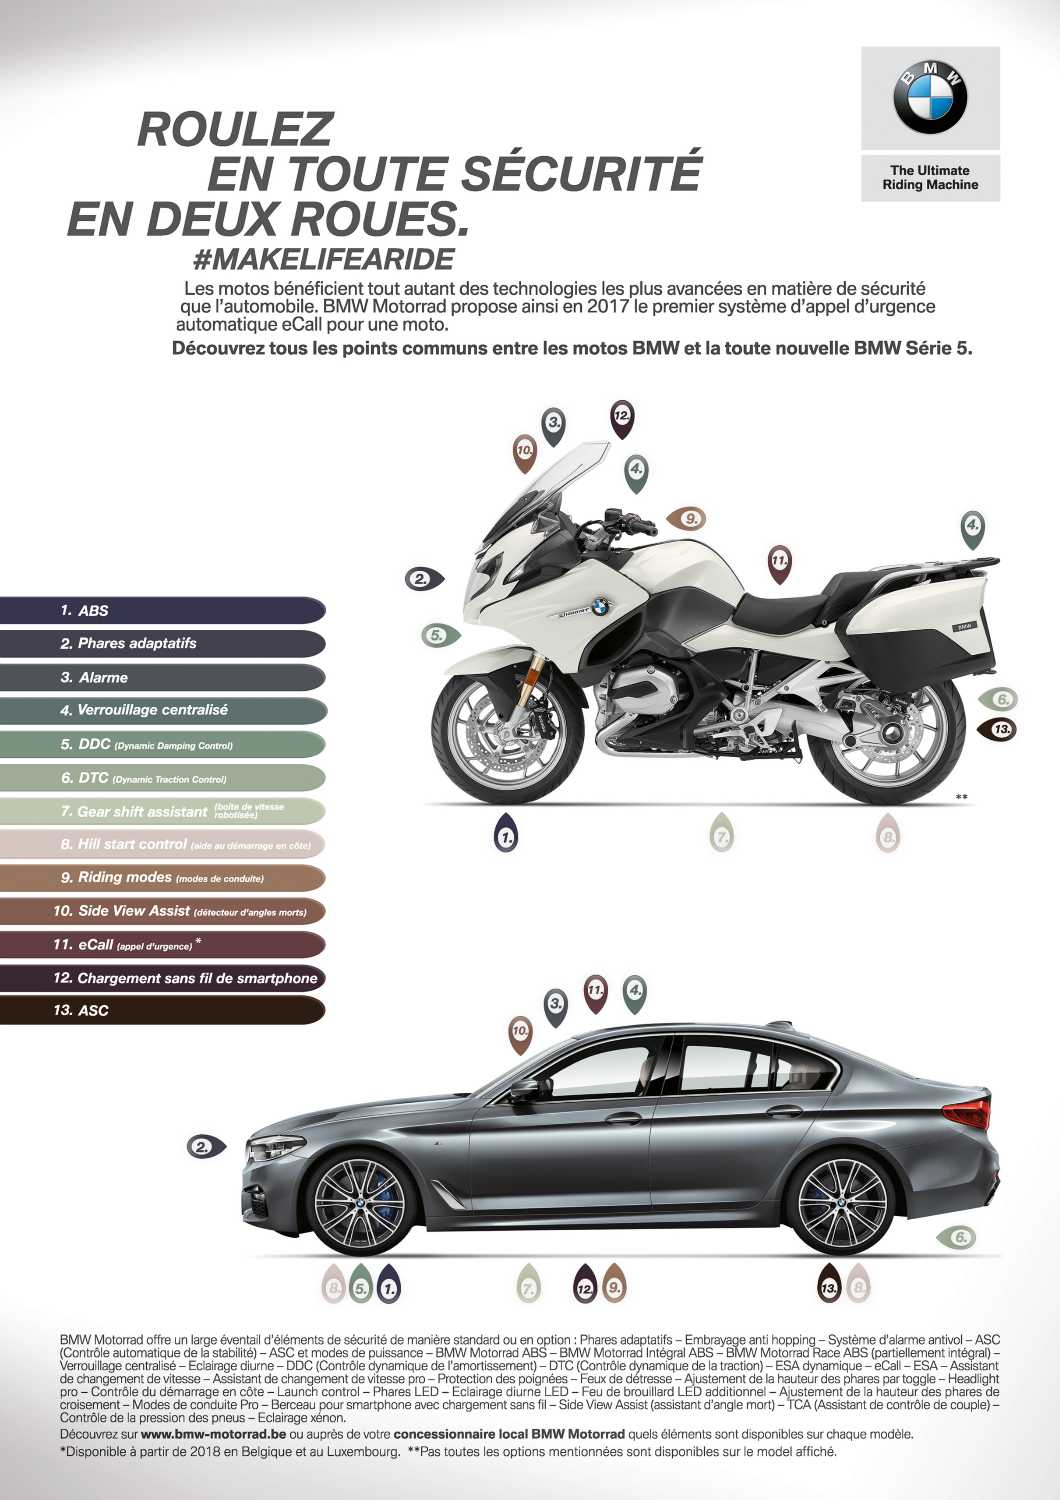 https://mediapool.bmwgroup.com/cache/P9/201612/P90245176/P90245176-bmw-motorrad-innovates-with-safety-features-on-its-new-motorcycles-12-2016-1060px.jpg